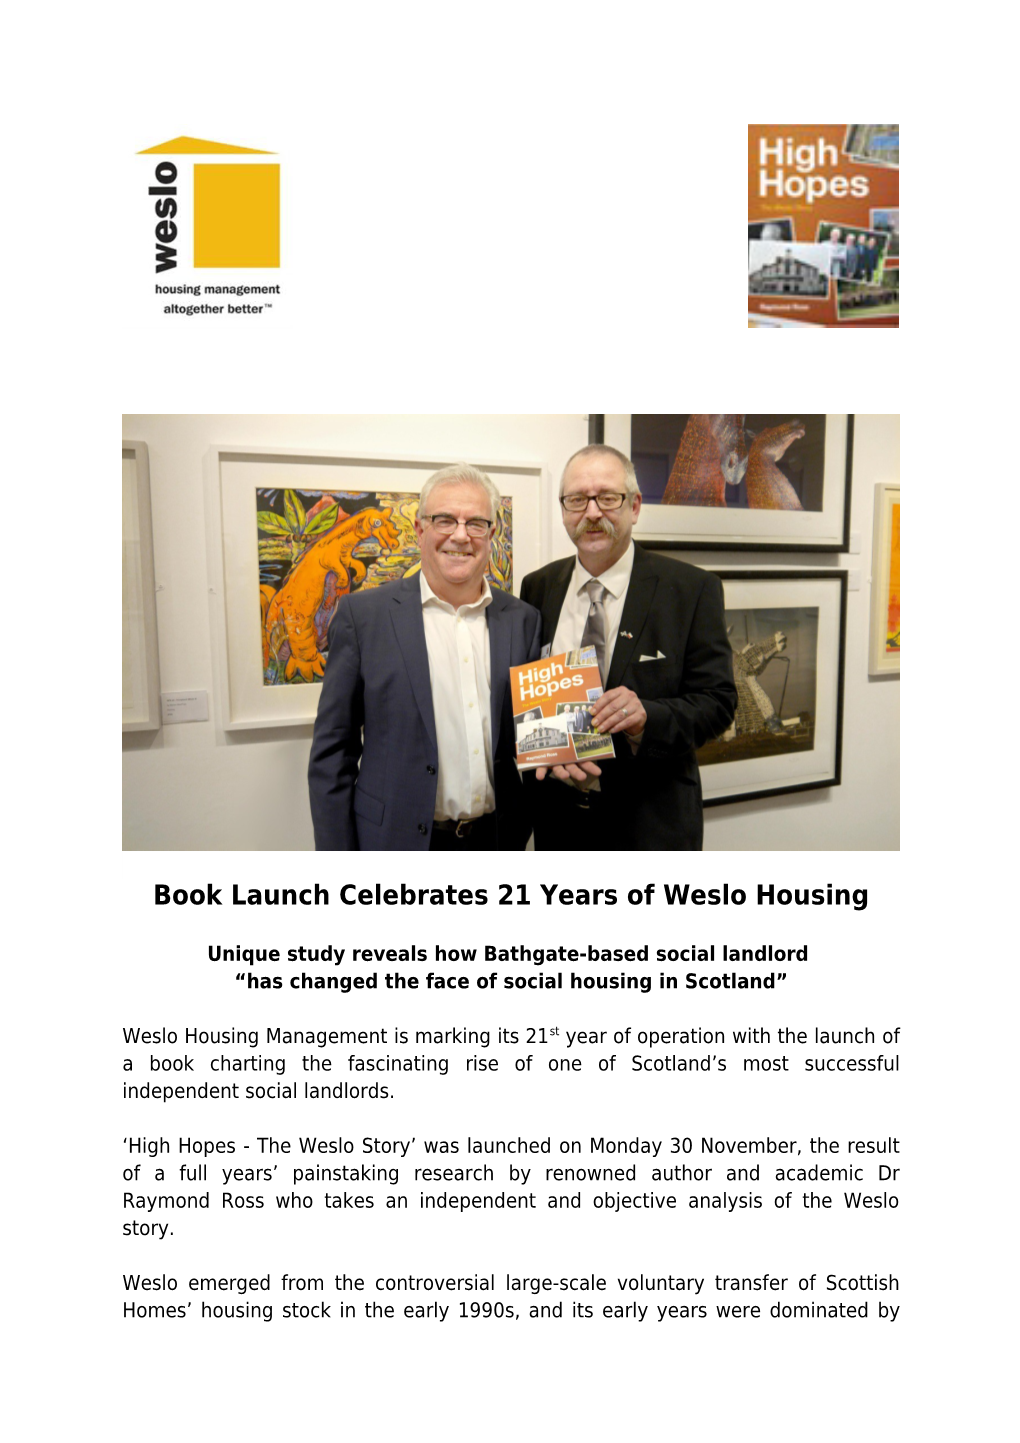 Book Launch Celebrates 21 Years of Weslo Housing